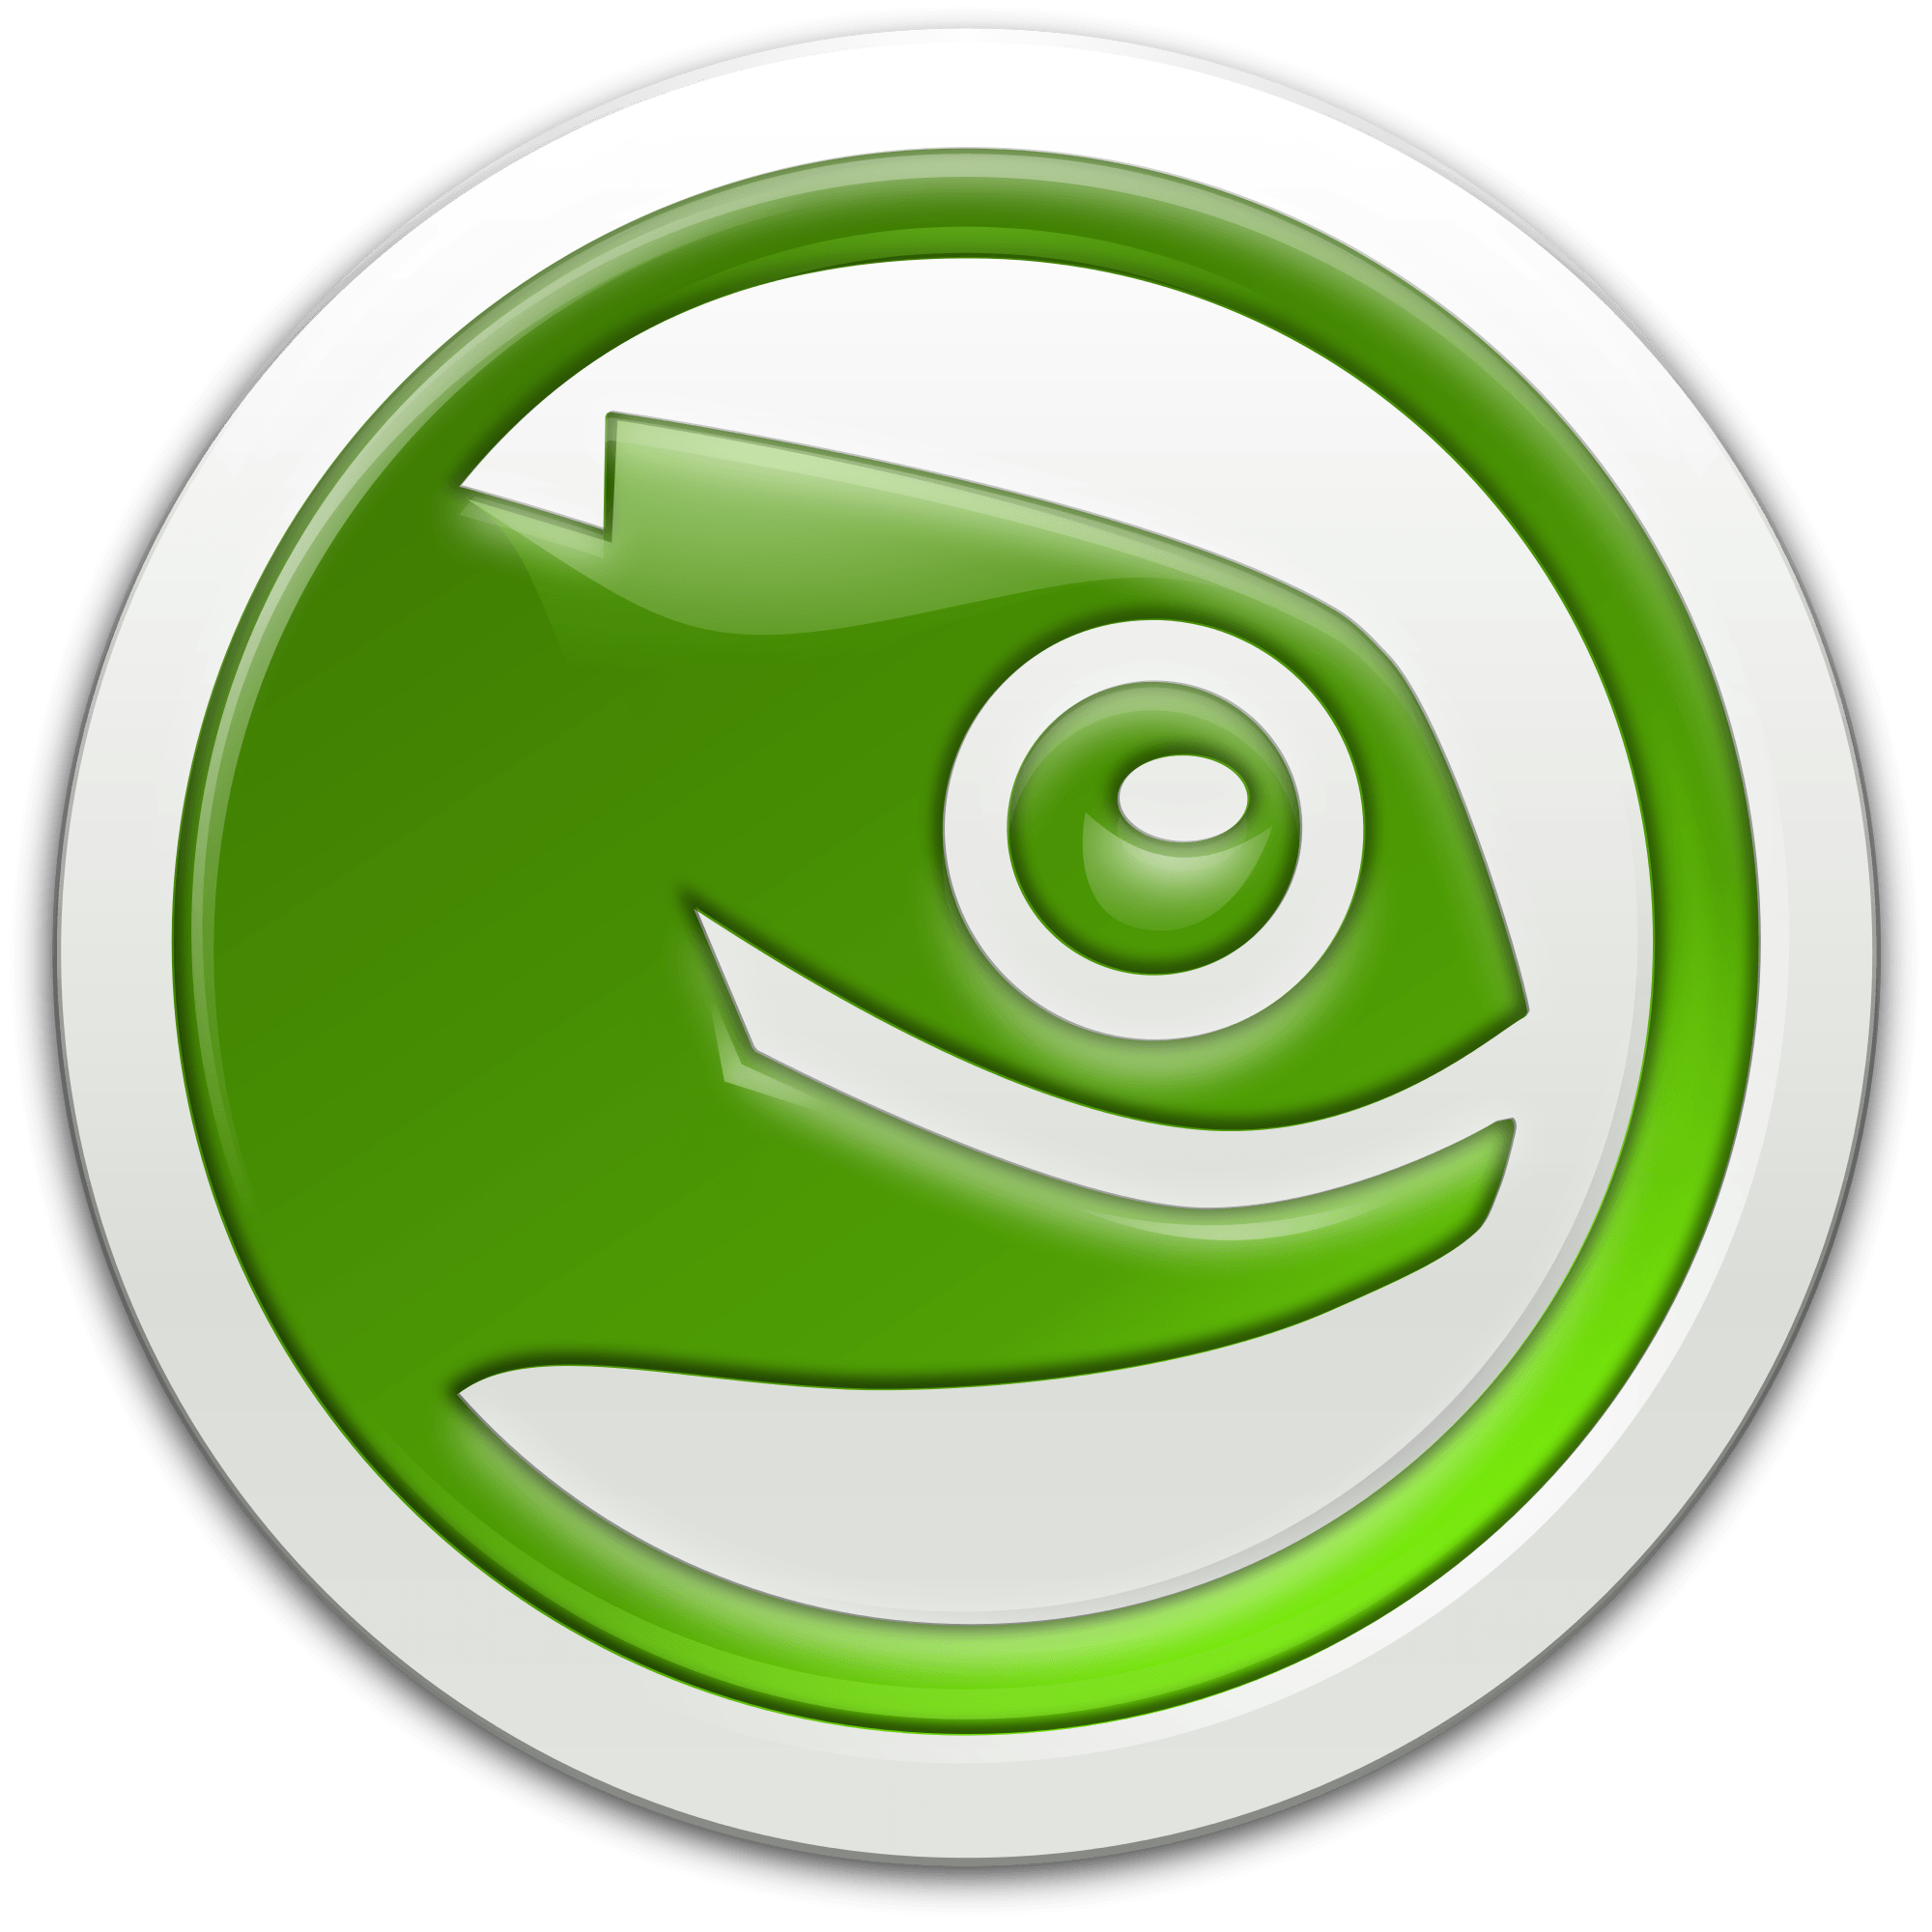 openSUSE Logo - File:OpenSUSE Geeko button bling7.svg - Wikimedia Commons